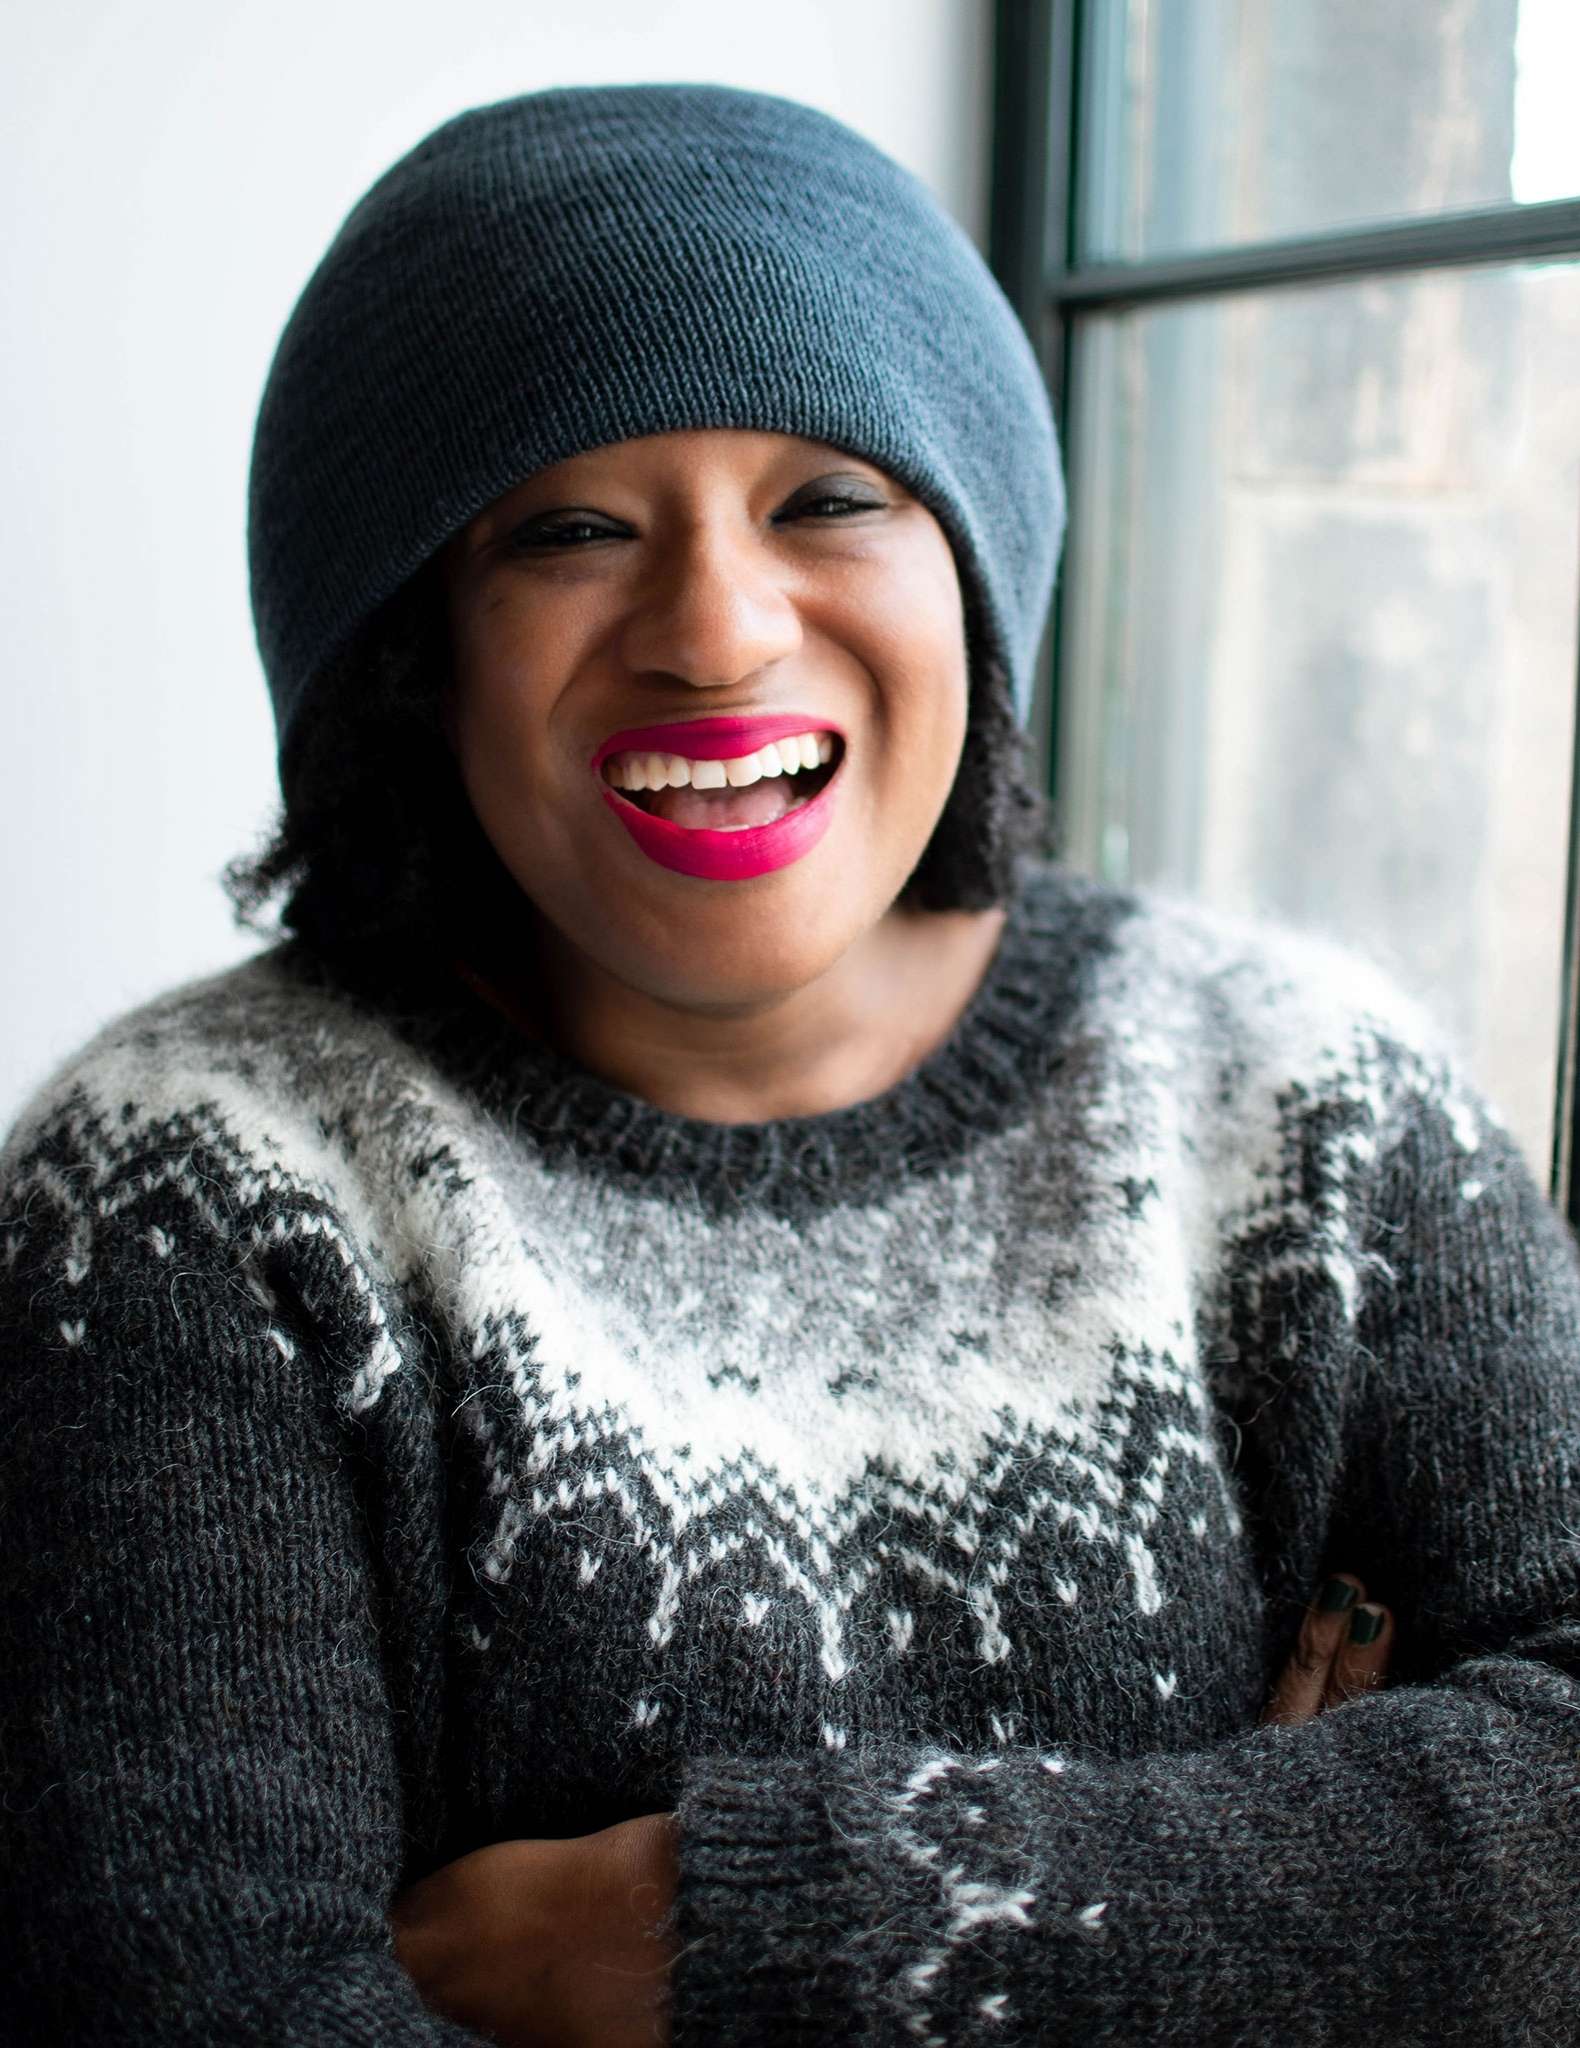 A close up of a black woman with bright pink lipstick wearing a teal beanie hat and colourwork sweater in blacks and neutral colours.